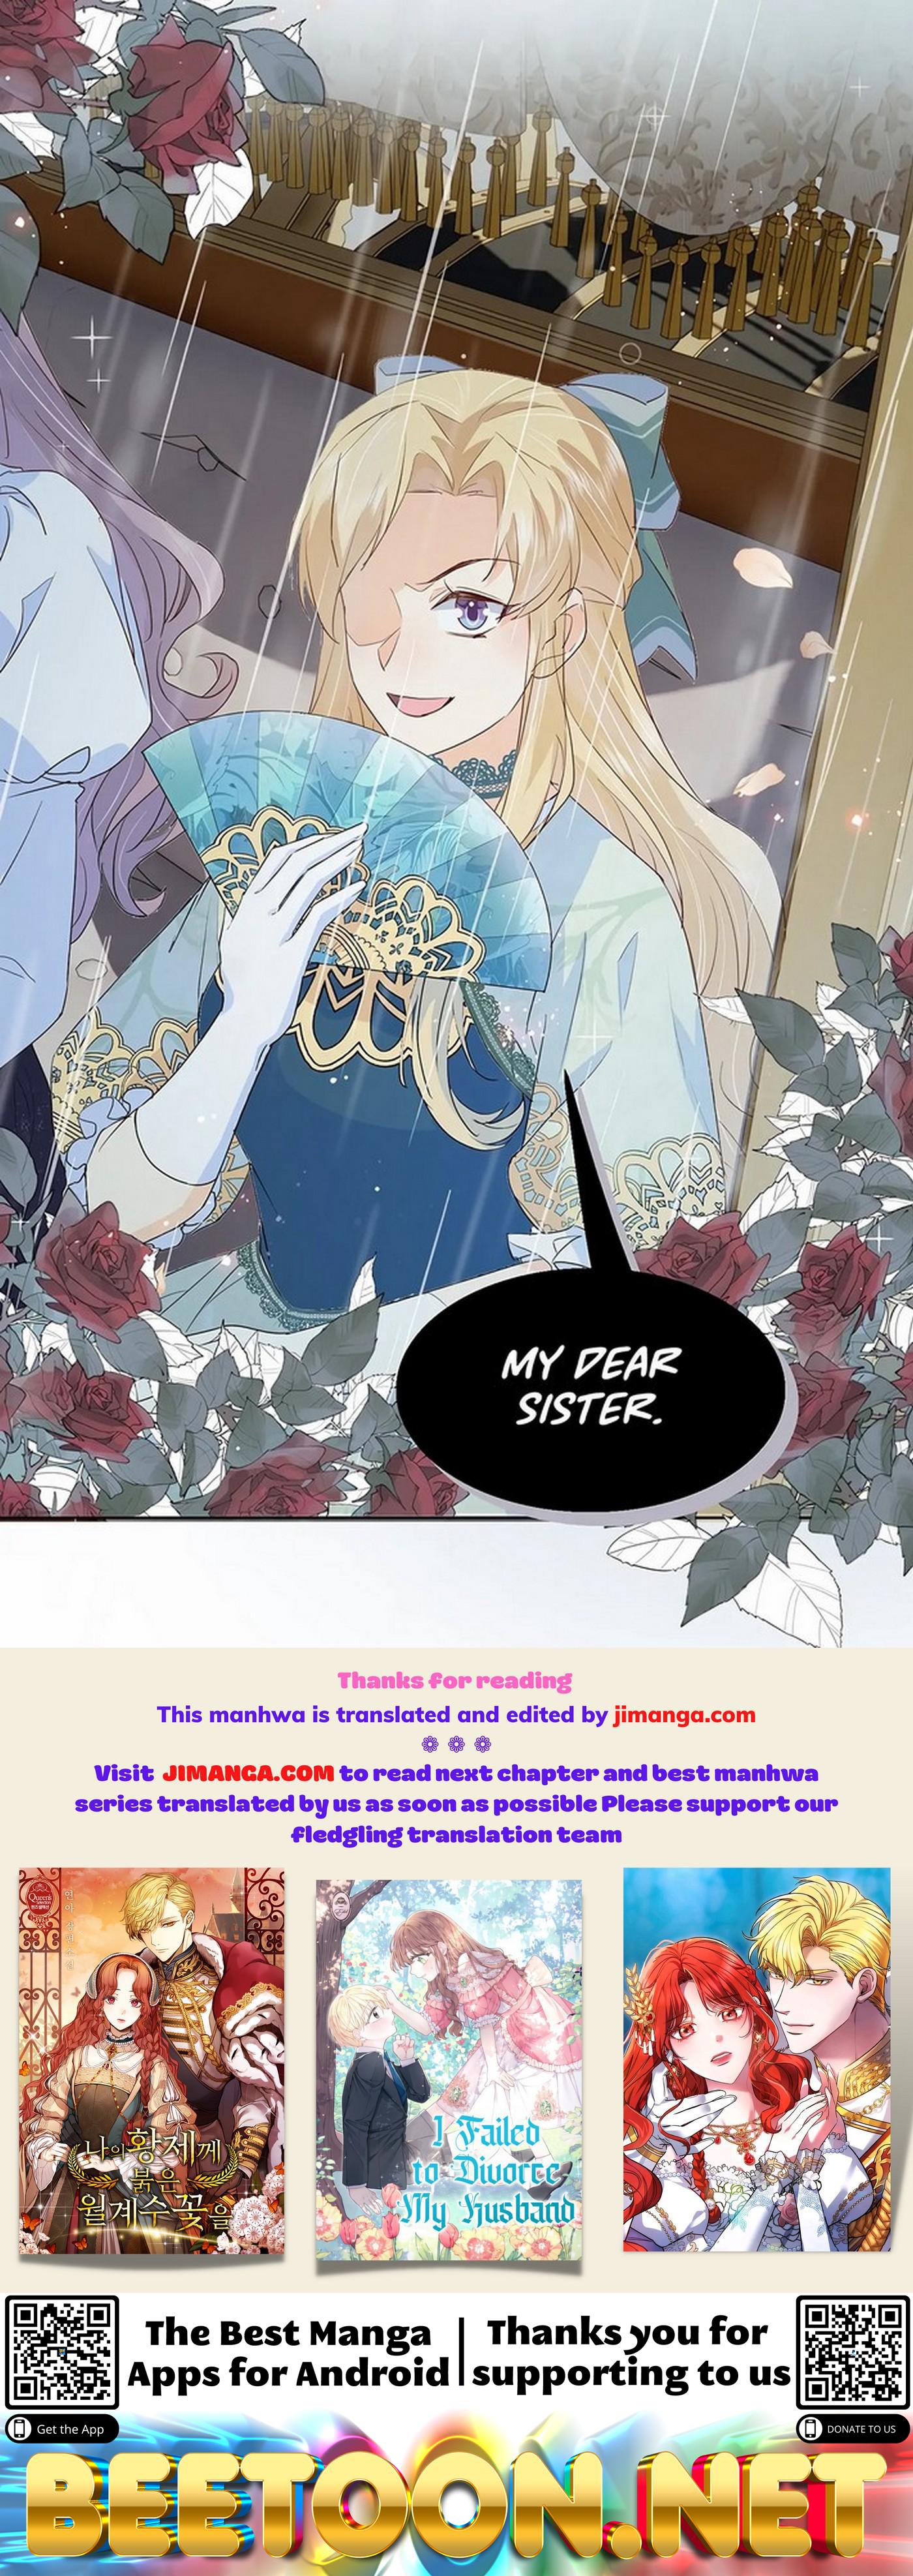 The Return of Princess Amy (Official) Chapter 26